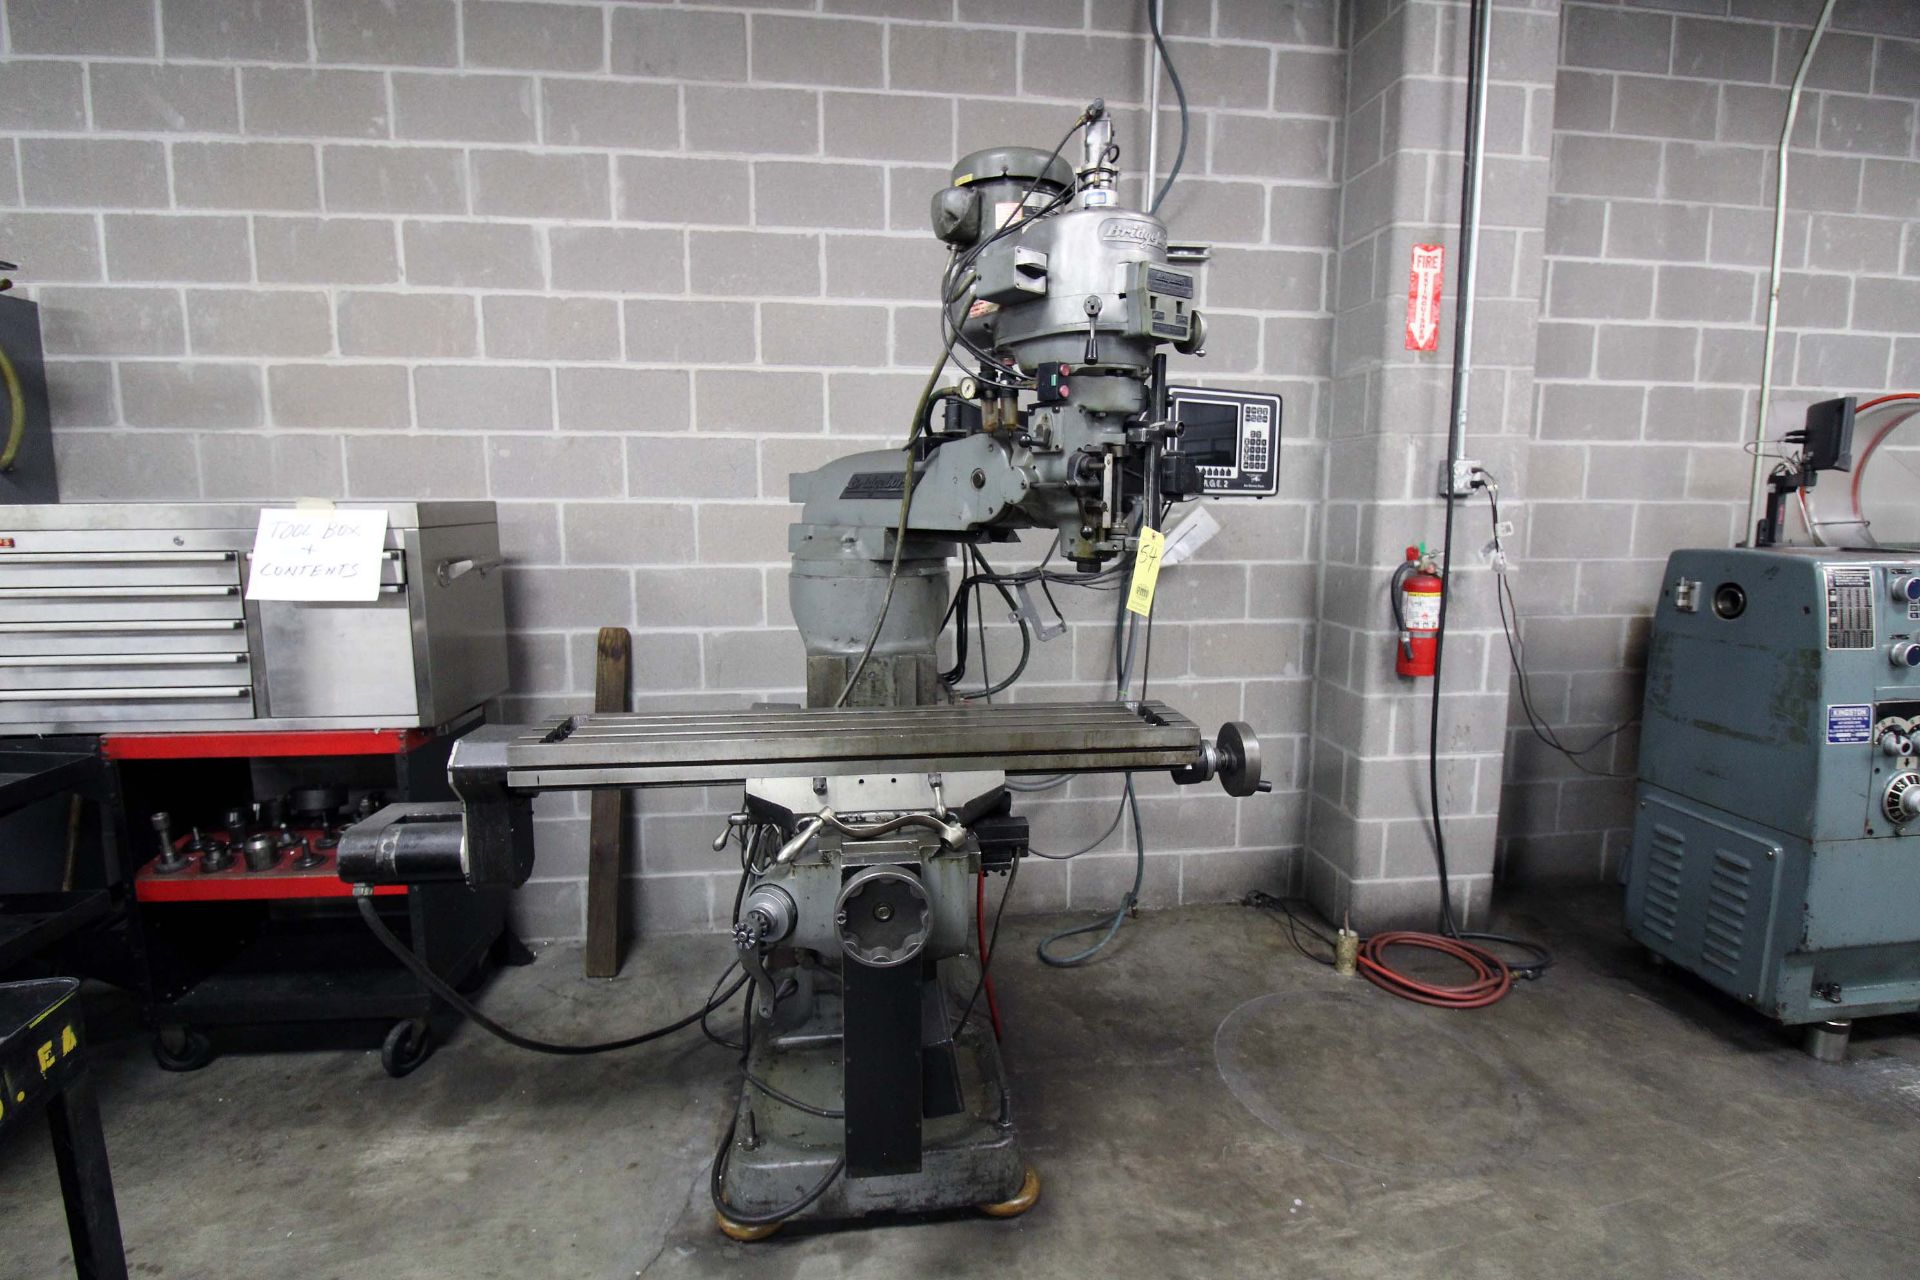 CNC KNEE STYLE MILL, BRIDGEPORT, 9” x 48” table, Trak Mdl. AGE2 control, 2-axis pwr. feed, S/N